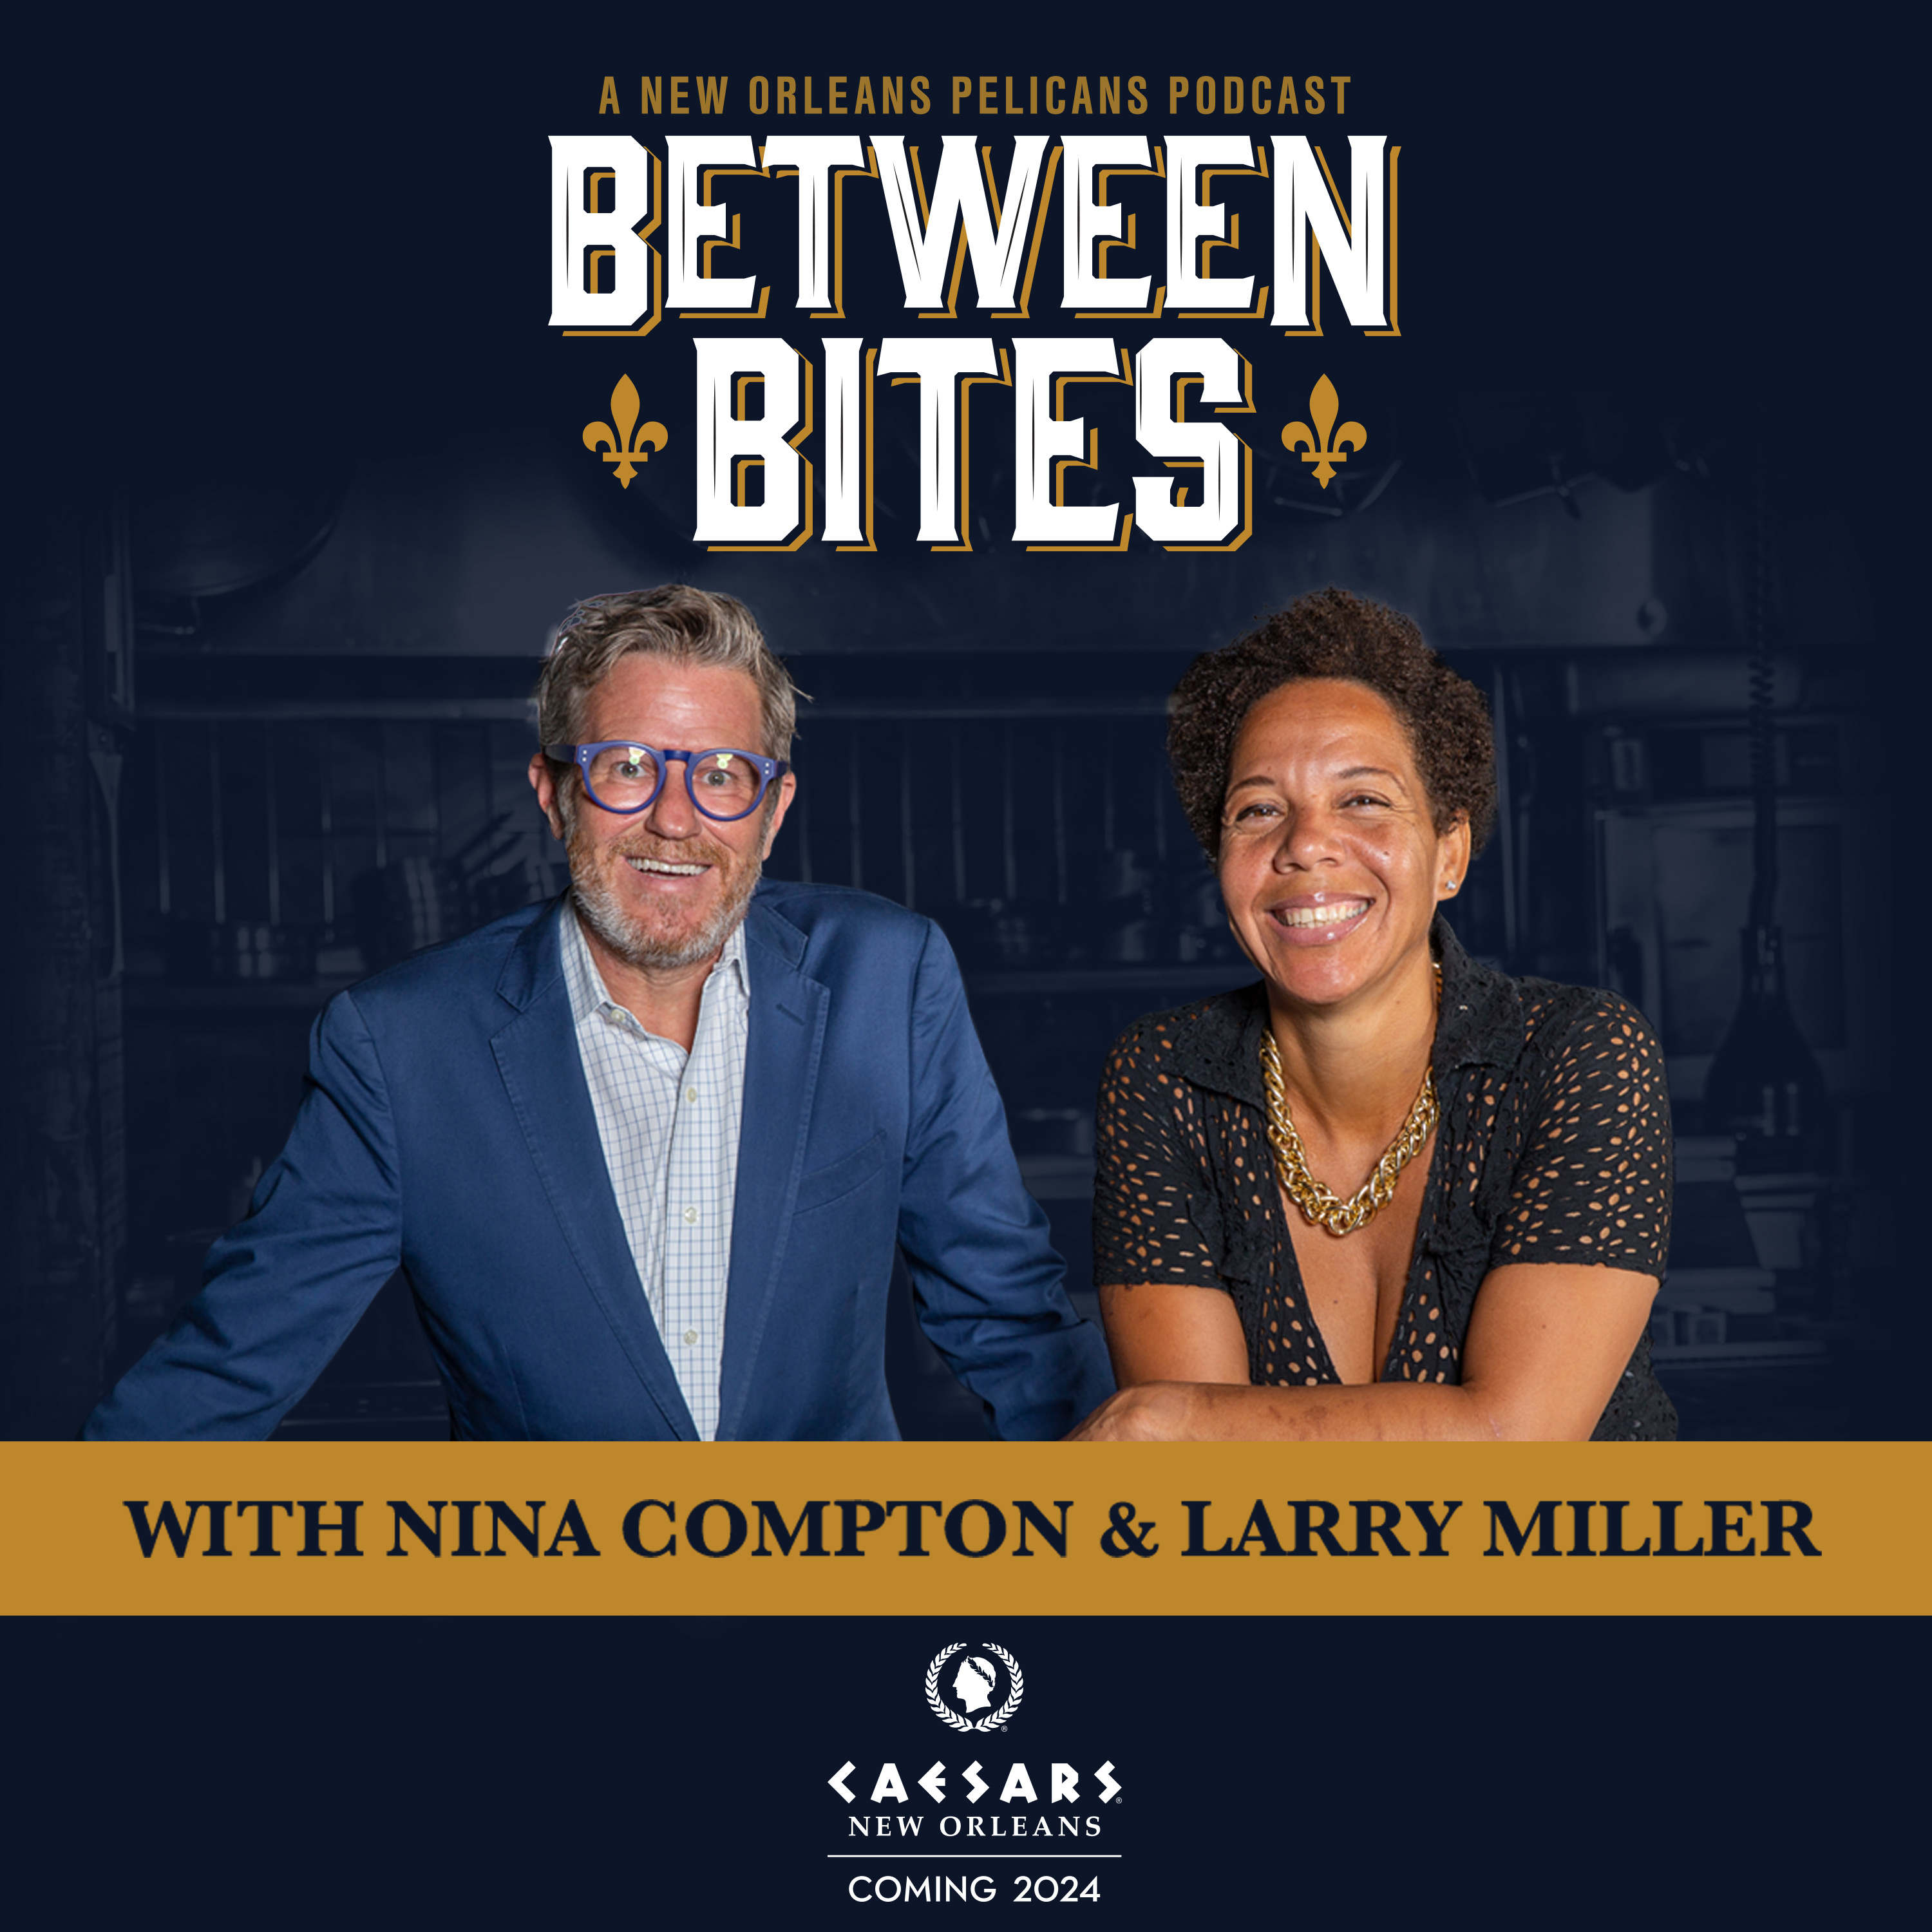 Chef Donald Link | Between Bites Podcast with Nina Compton & Larry Miller S2E2